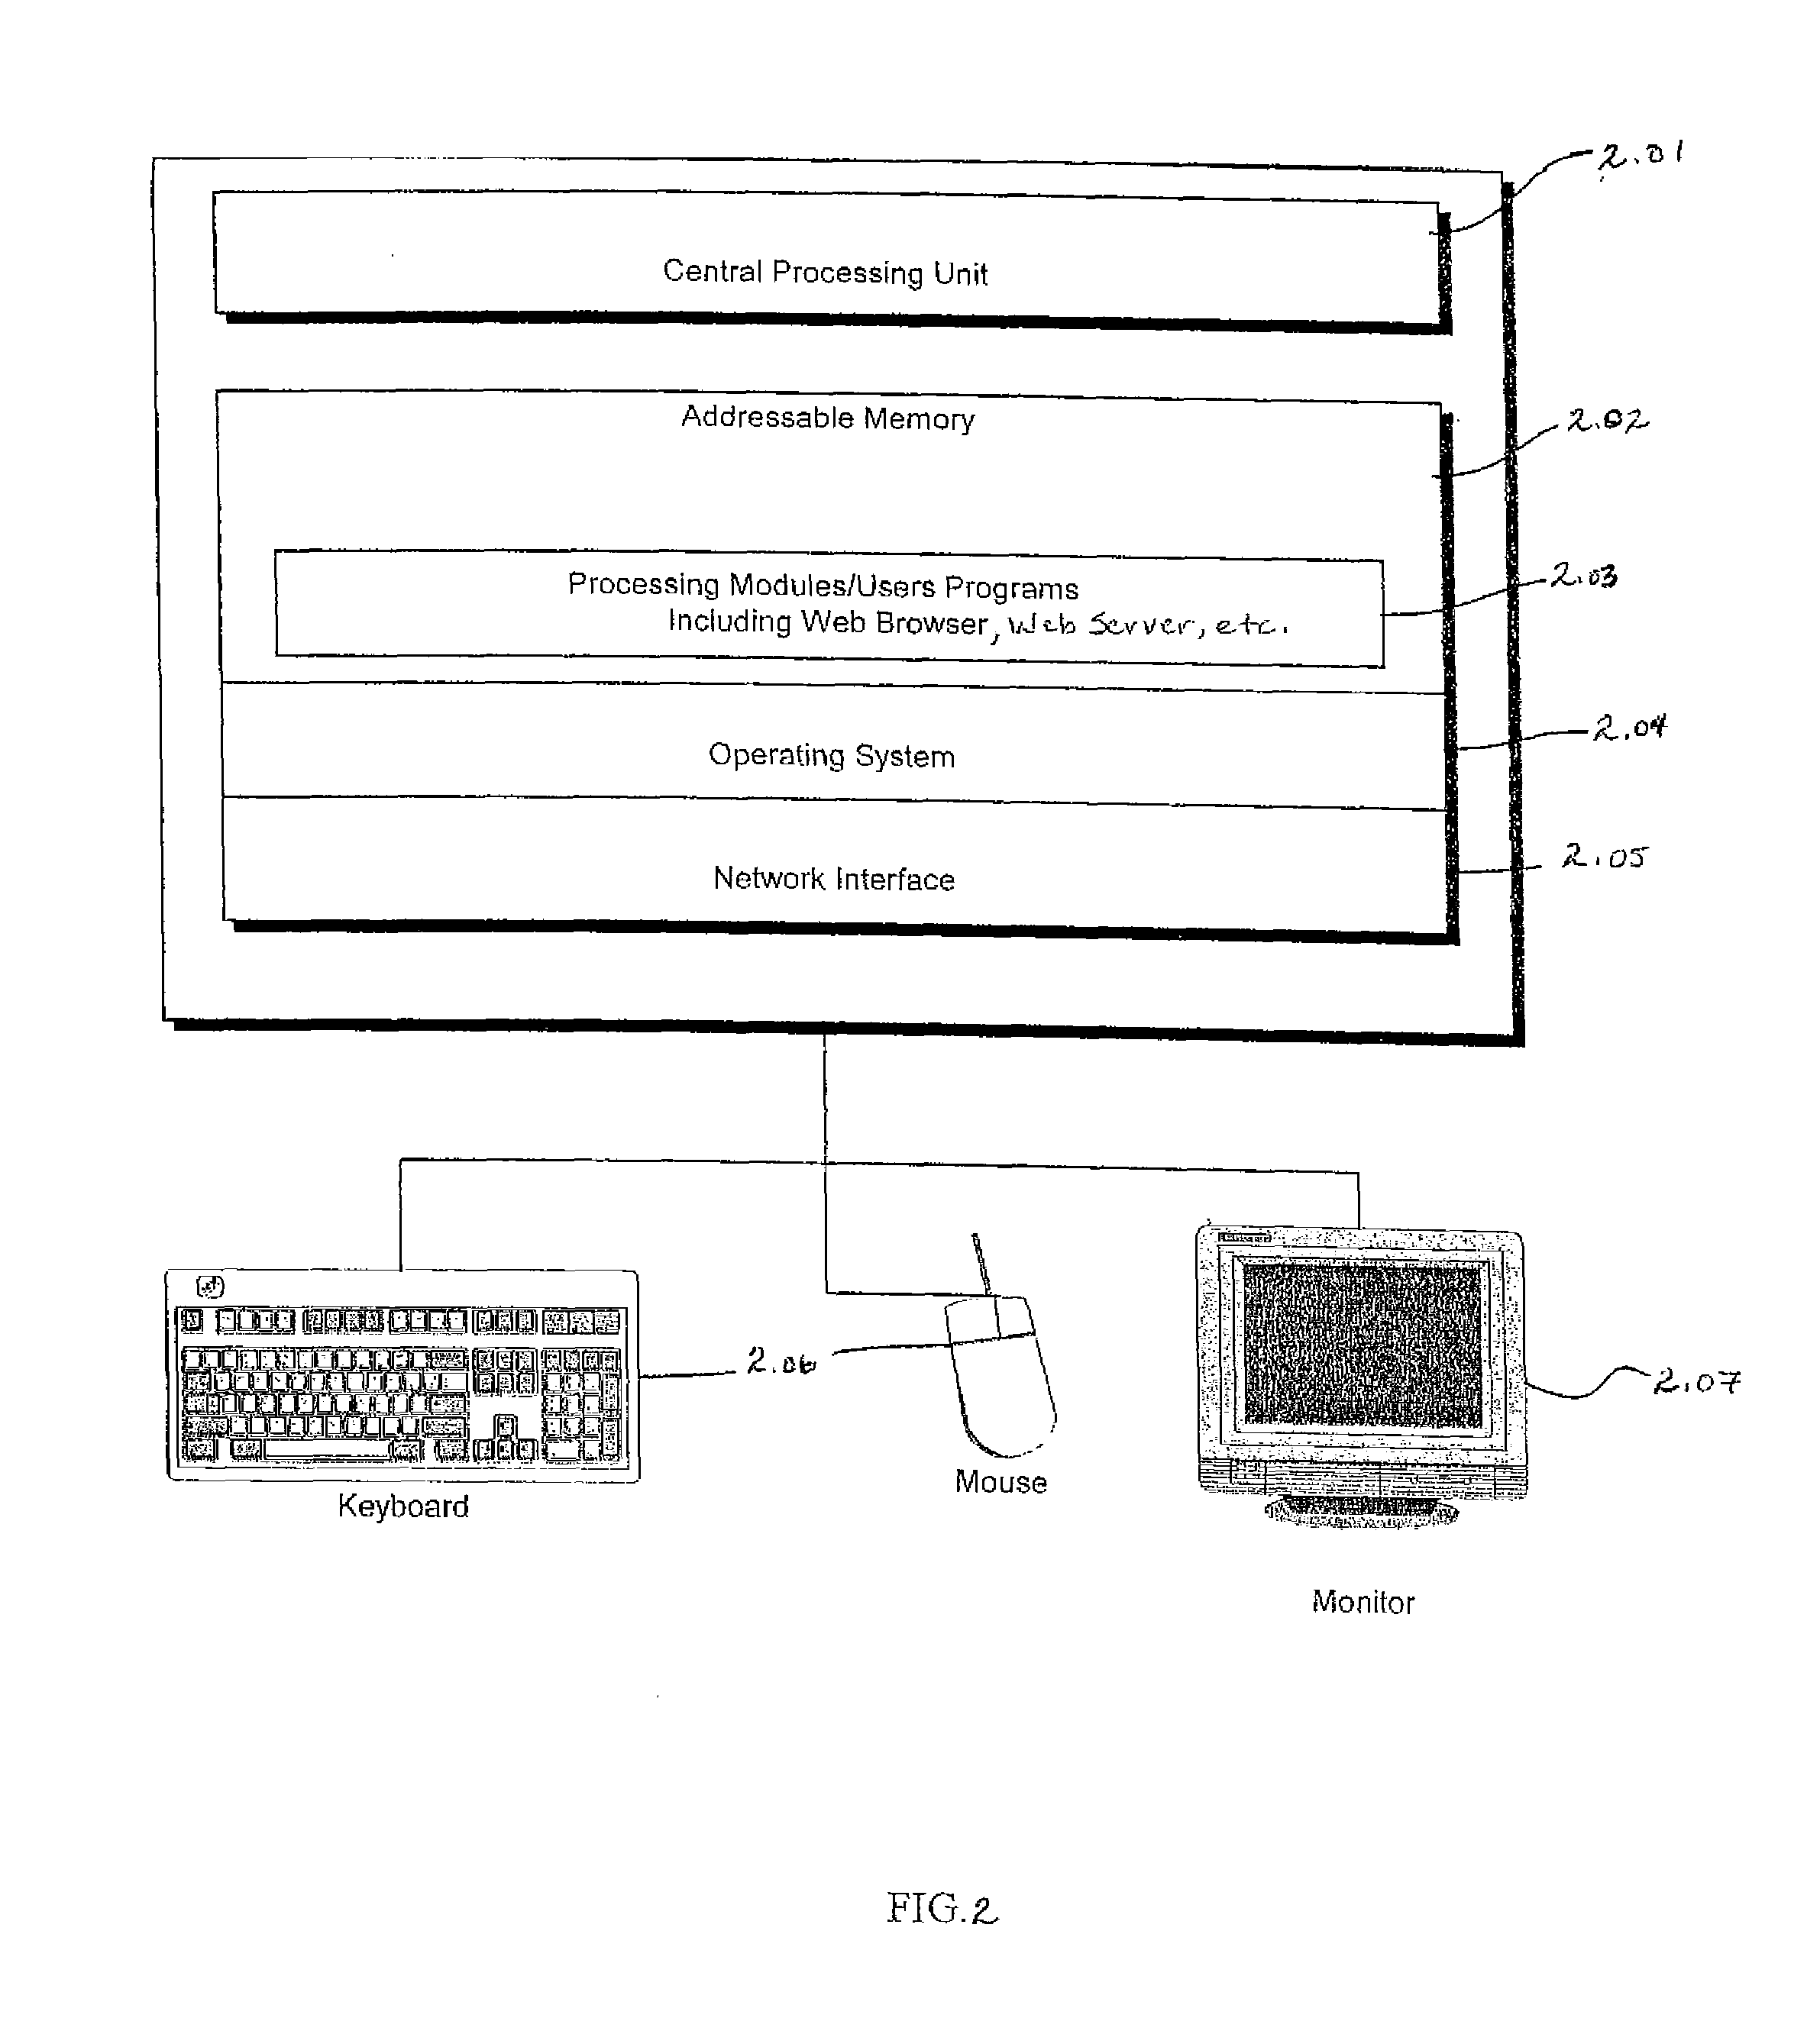 Computer system and method for networkd interchange of data and information for members of the real estate financial and related transactional services industry